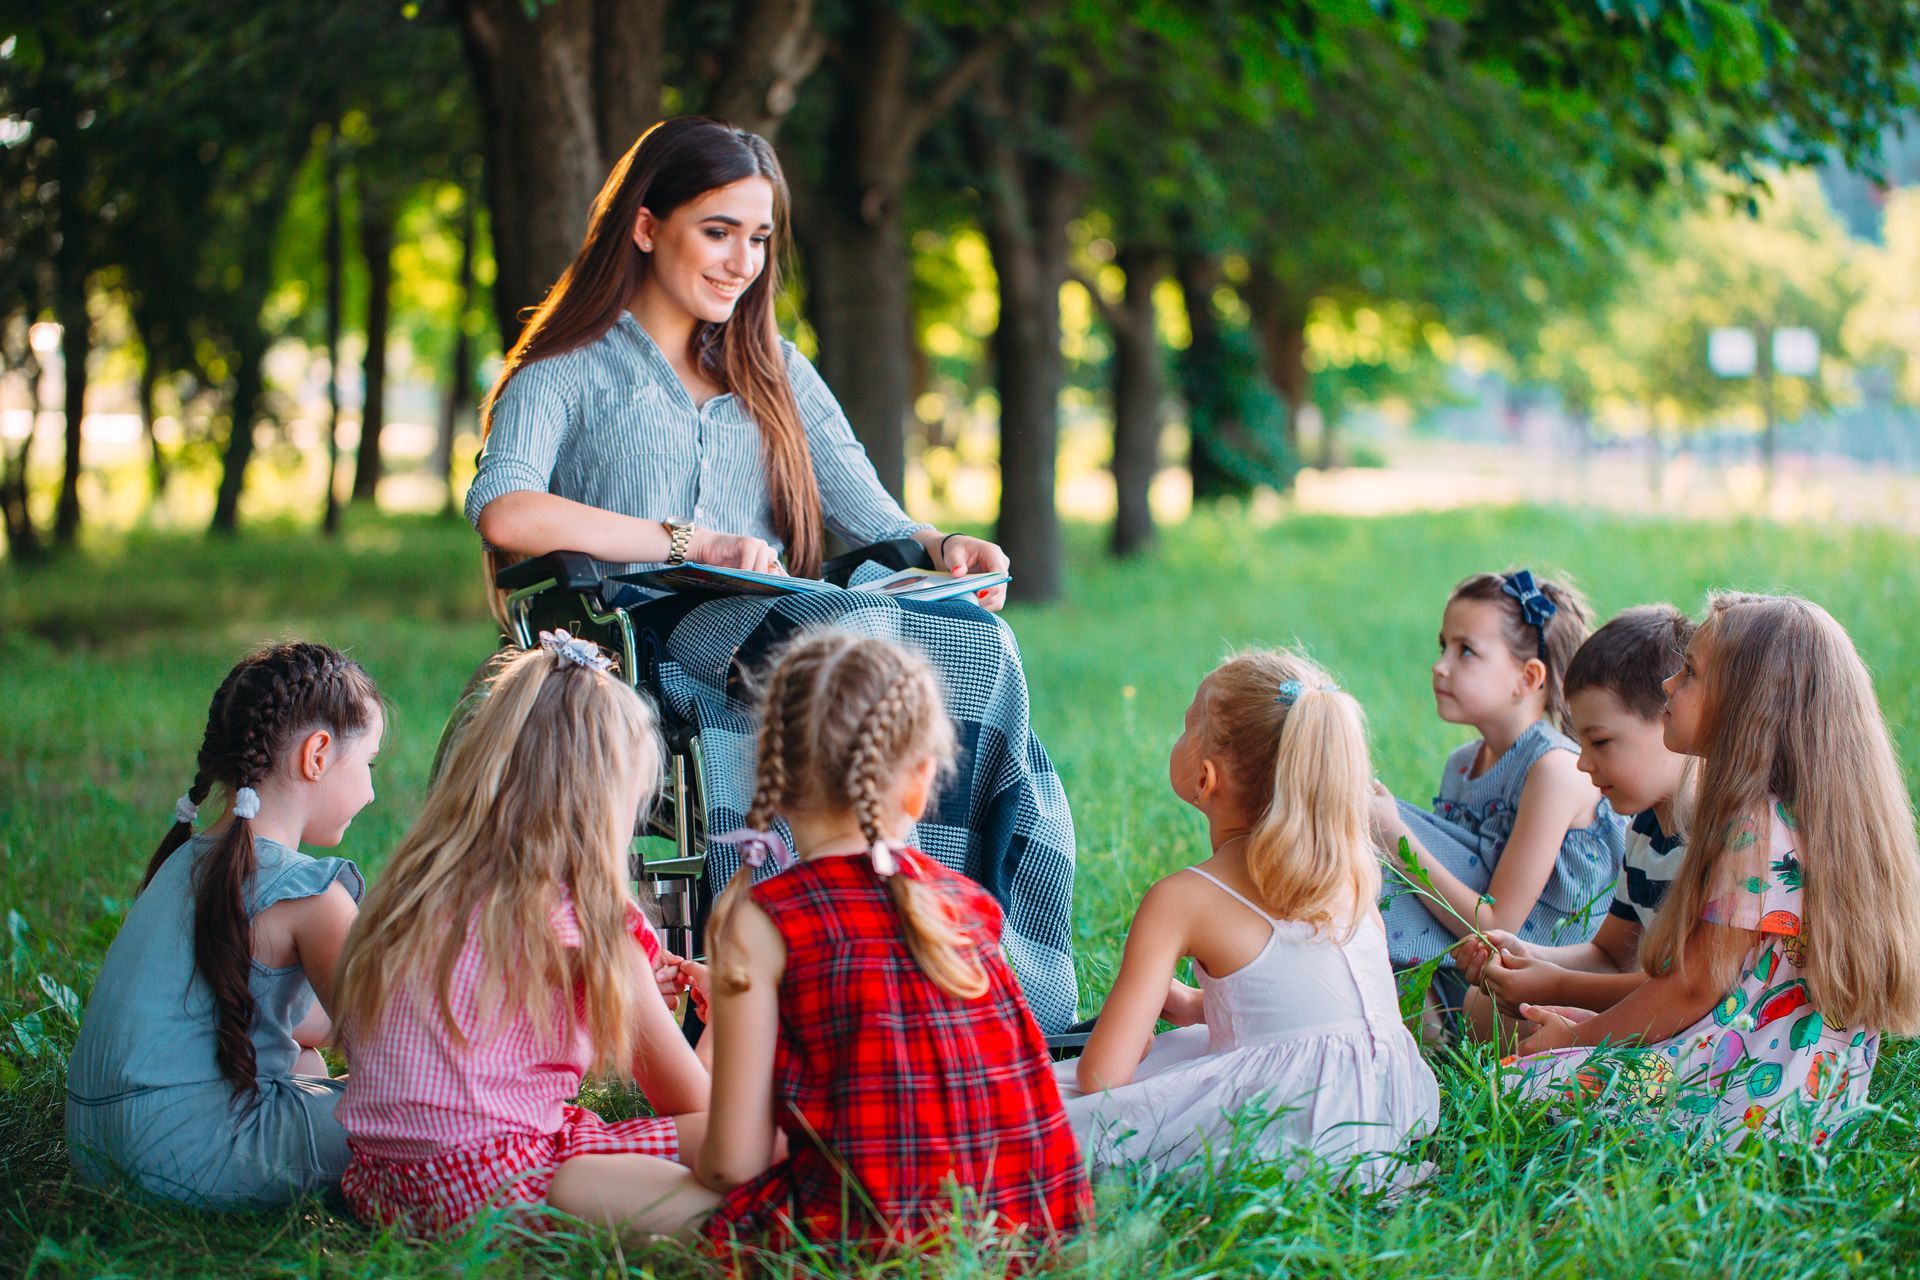 A young and beautiful female teacher in a wheelchair conducts a class outside with a group of smiling, attentive children.